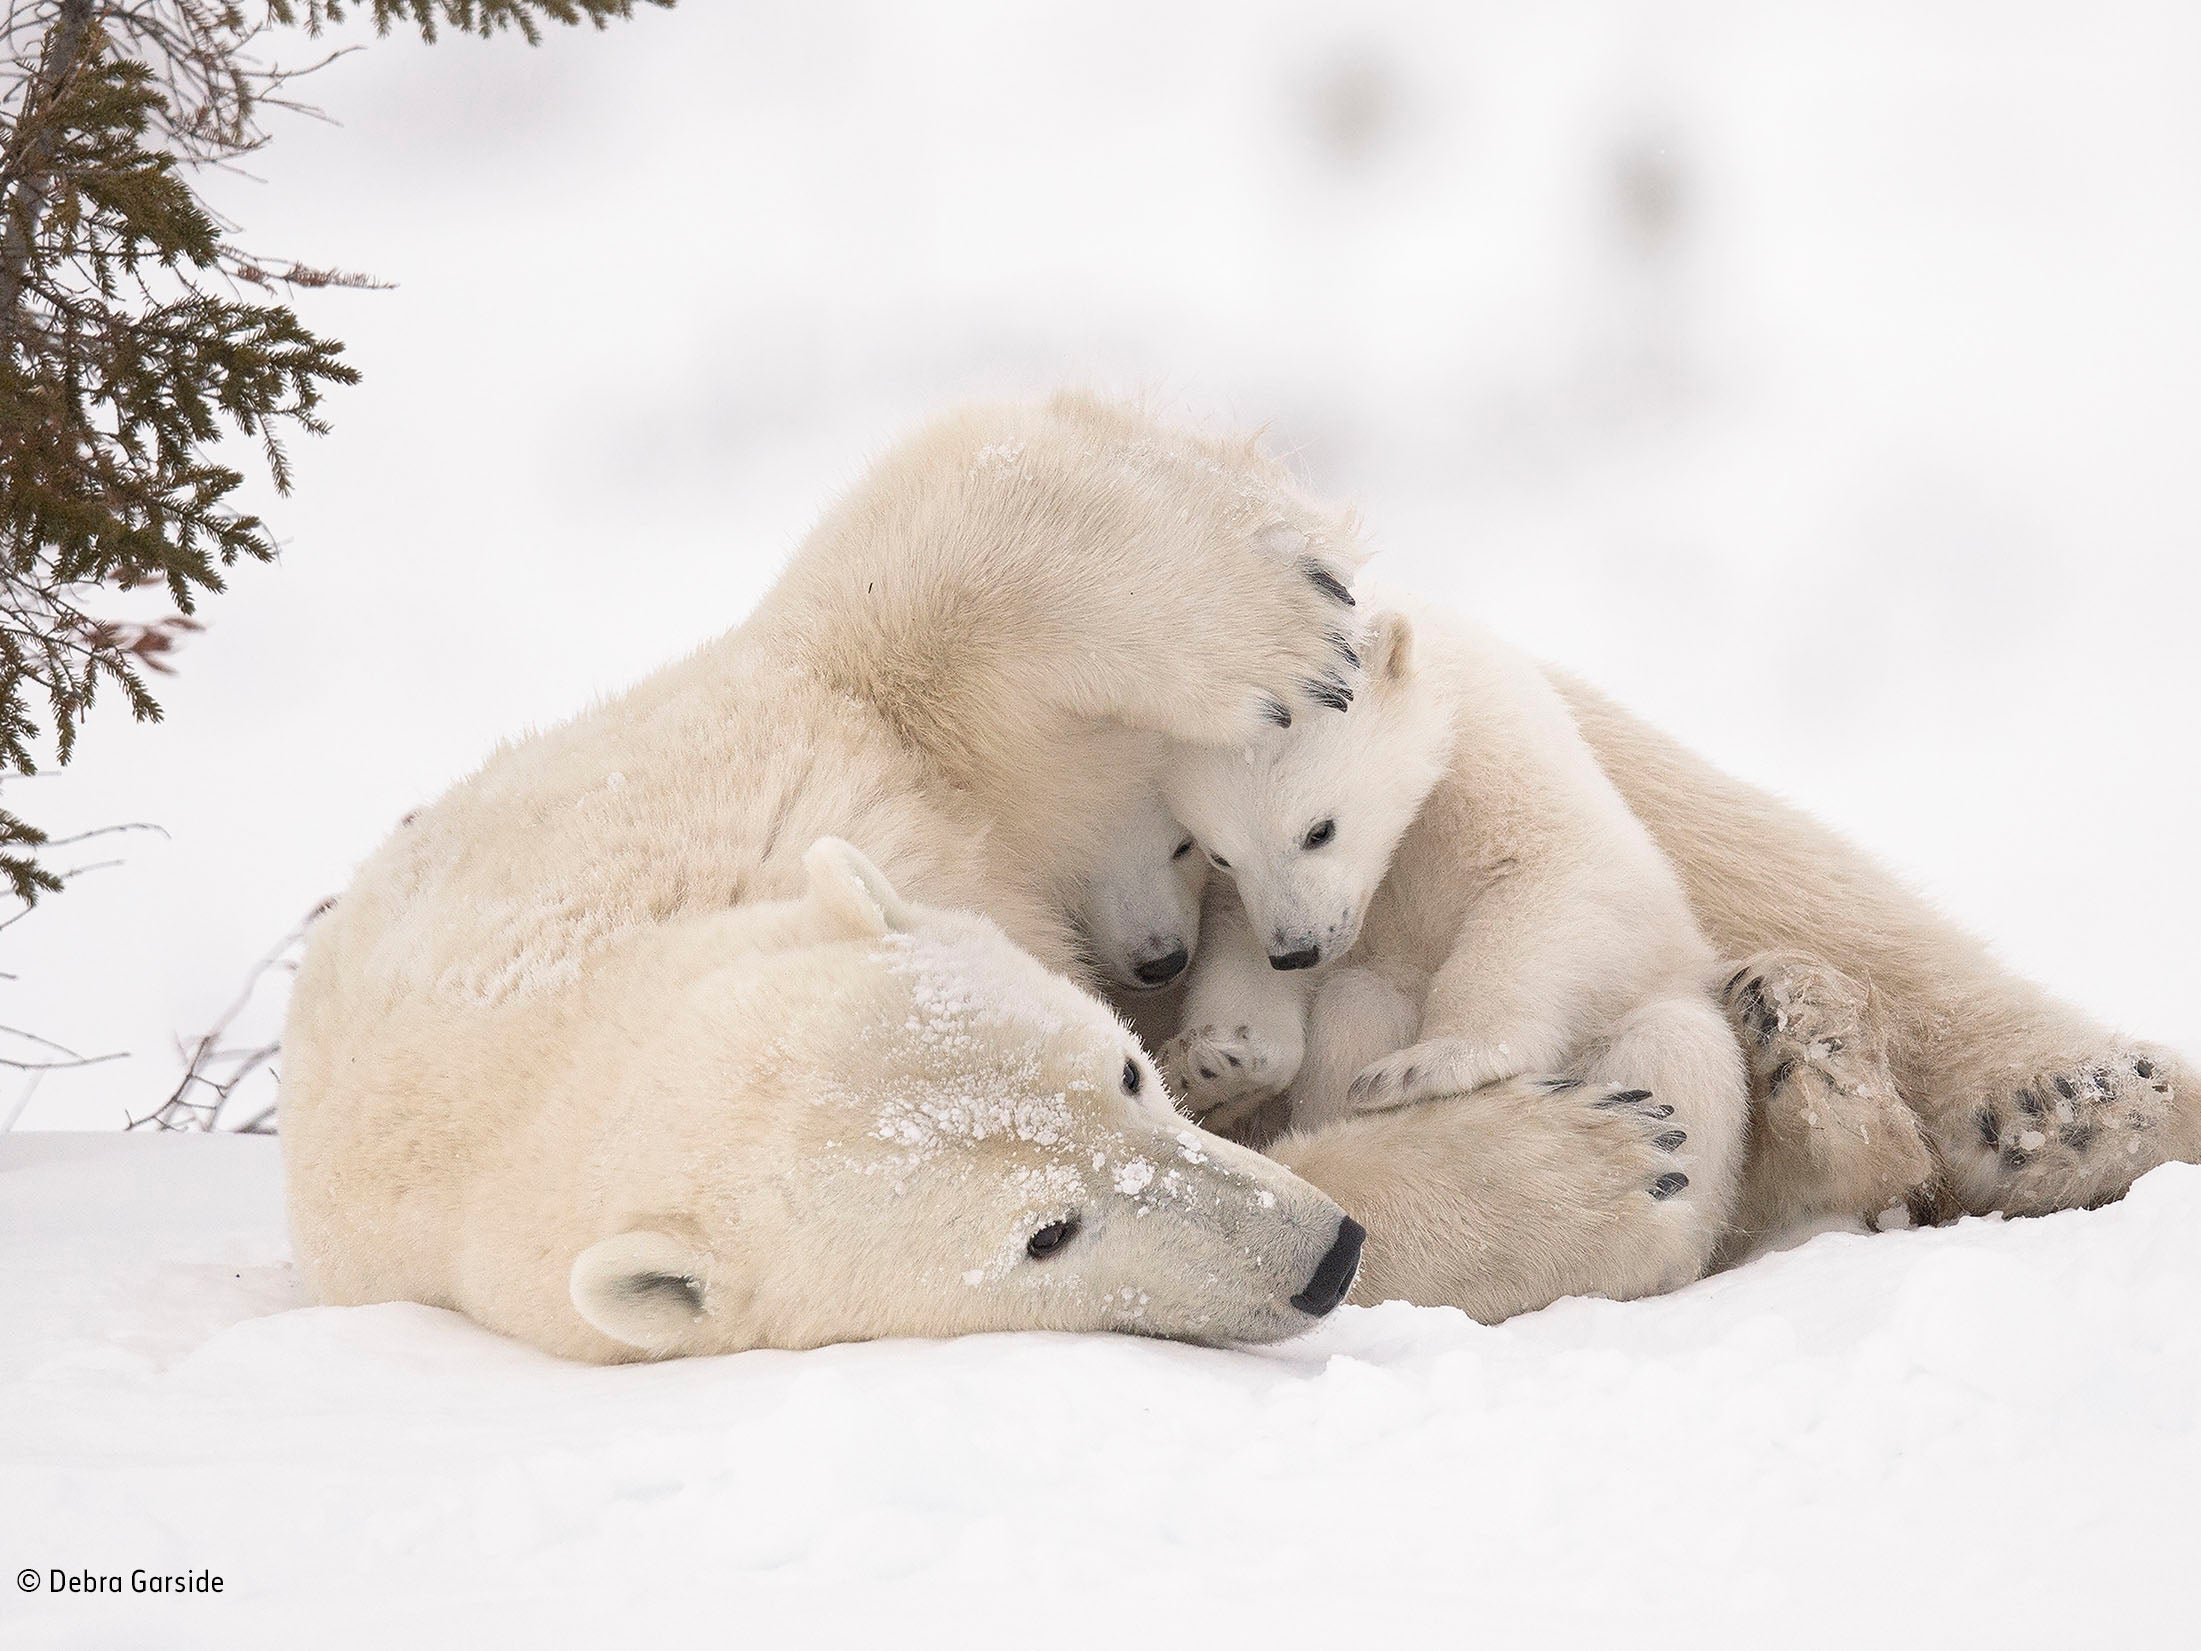 Another shortlisted photograph shows a polar bear mother and her cubs emerging from their den in early spring